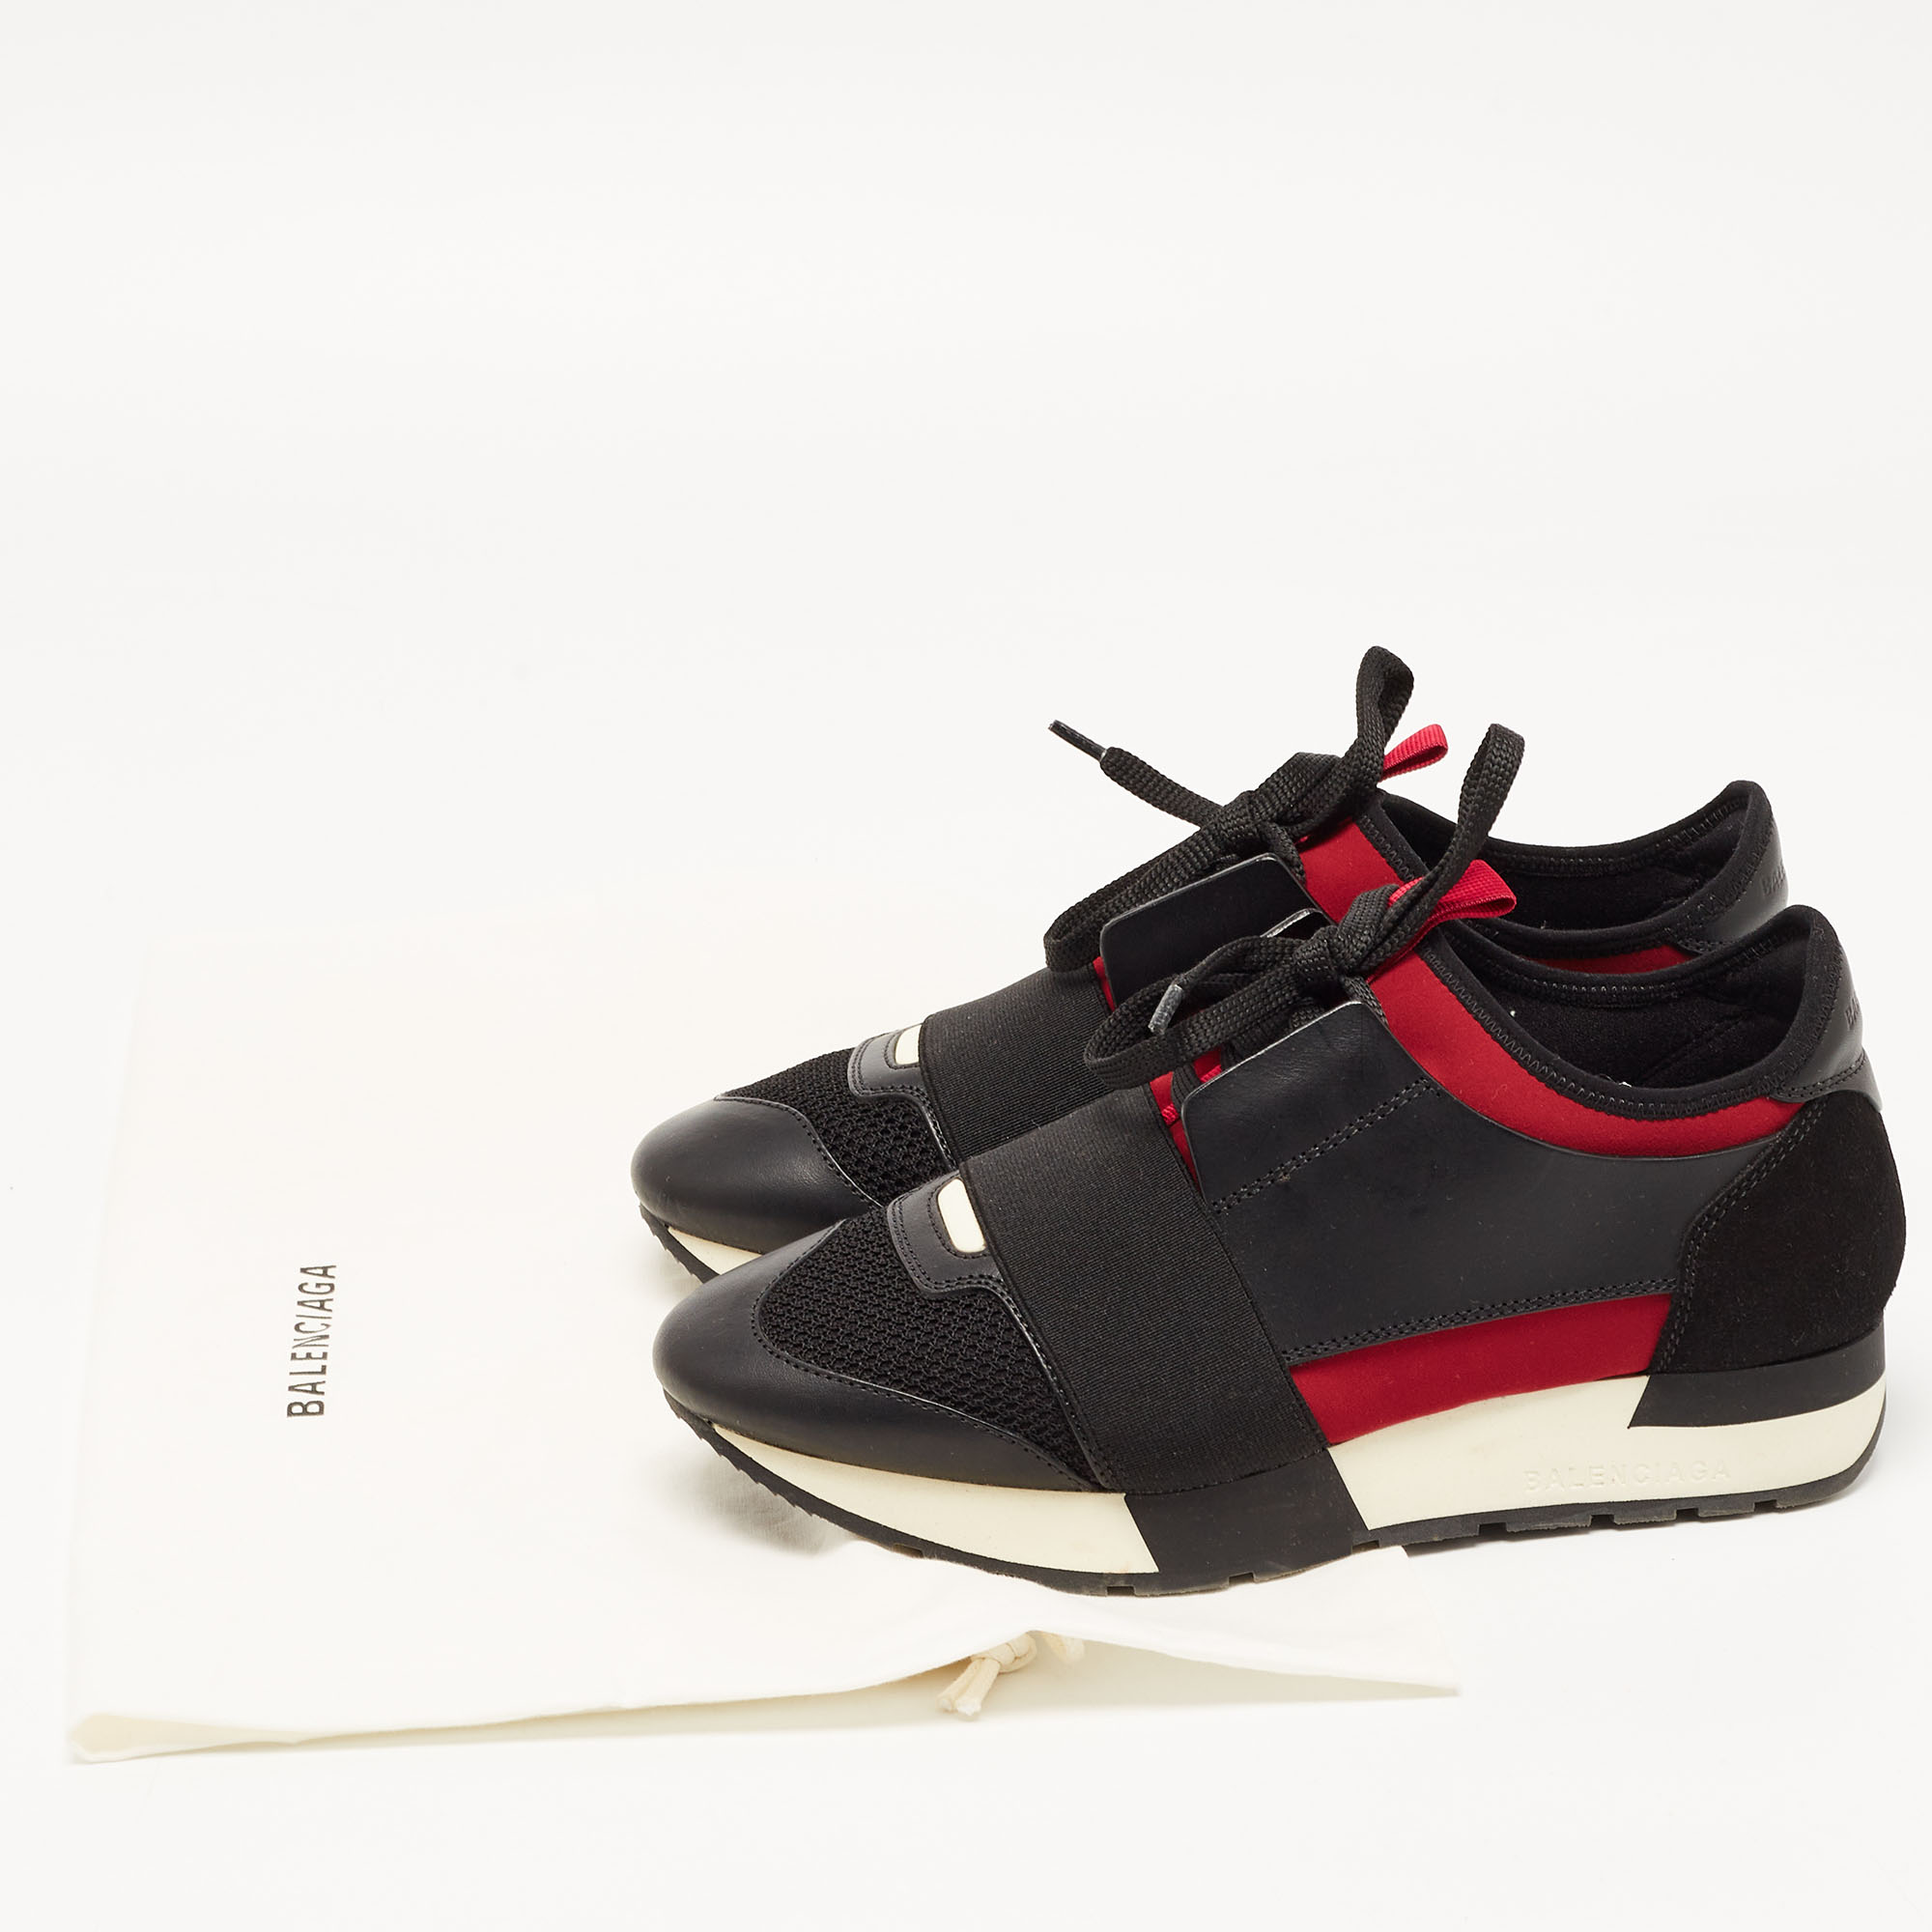 Balenciaga Black/Red Leather And Mesh Race Runner Sneakers Size 36